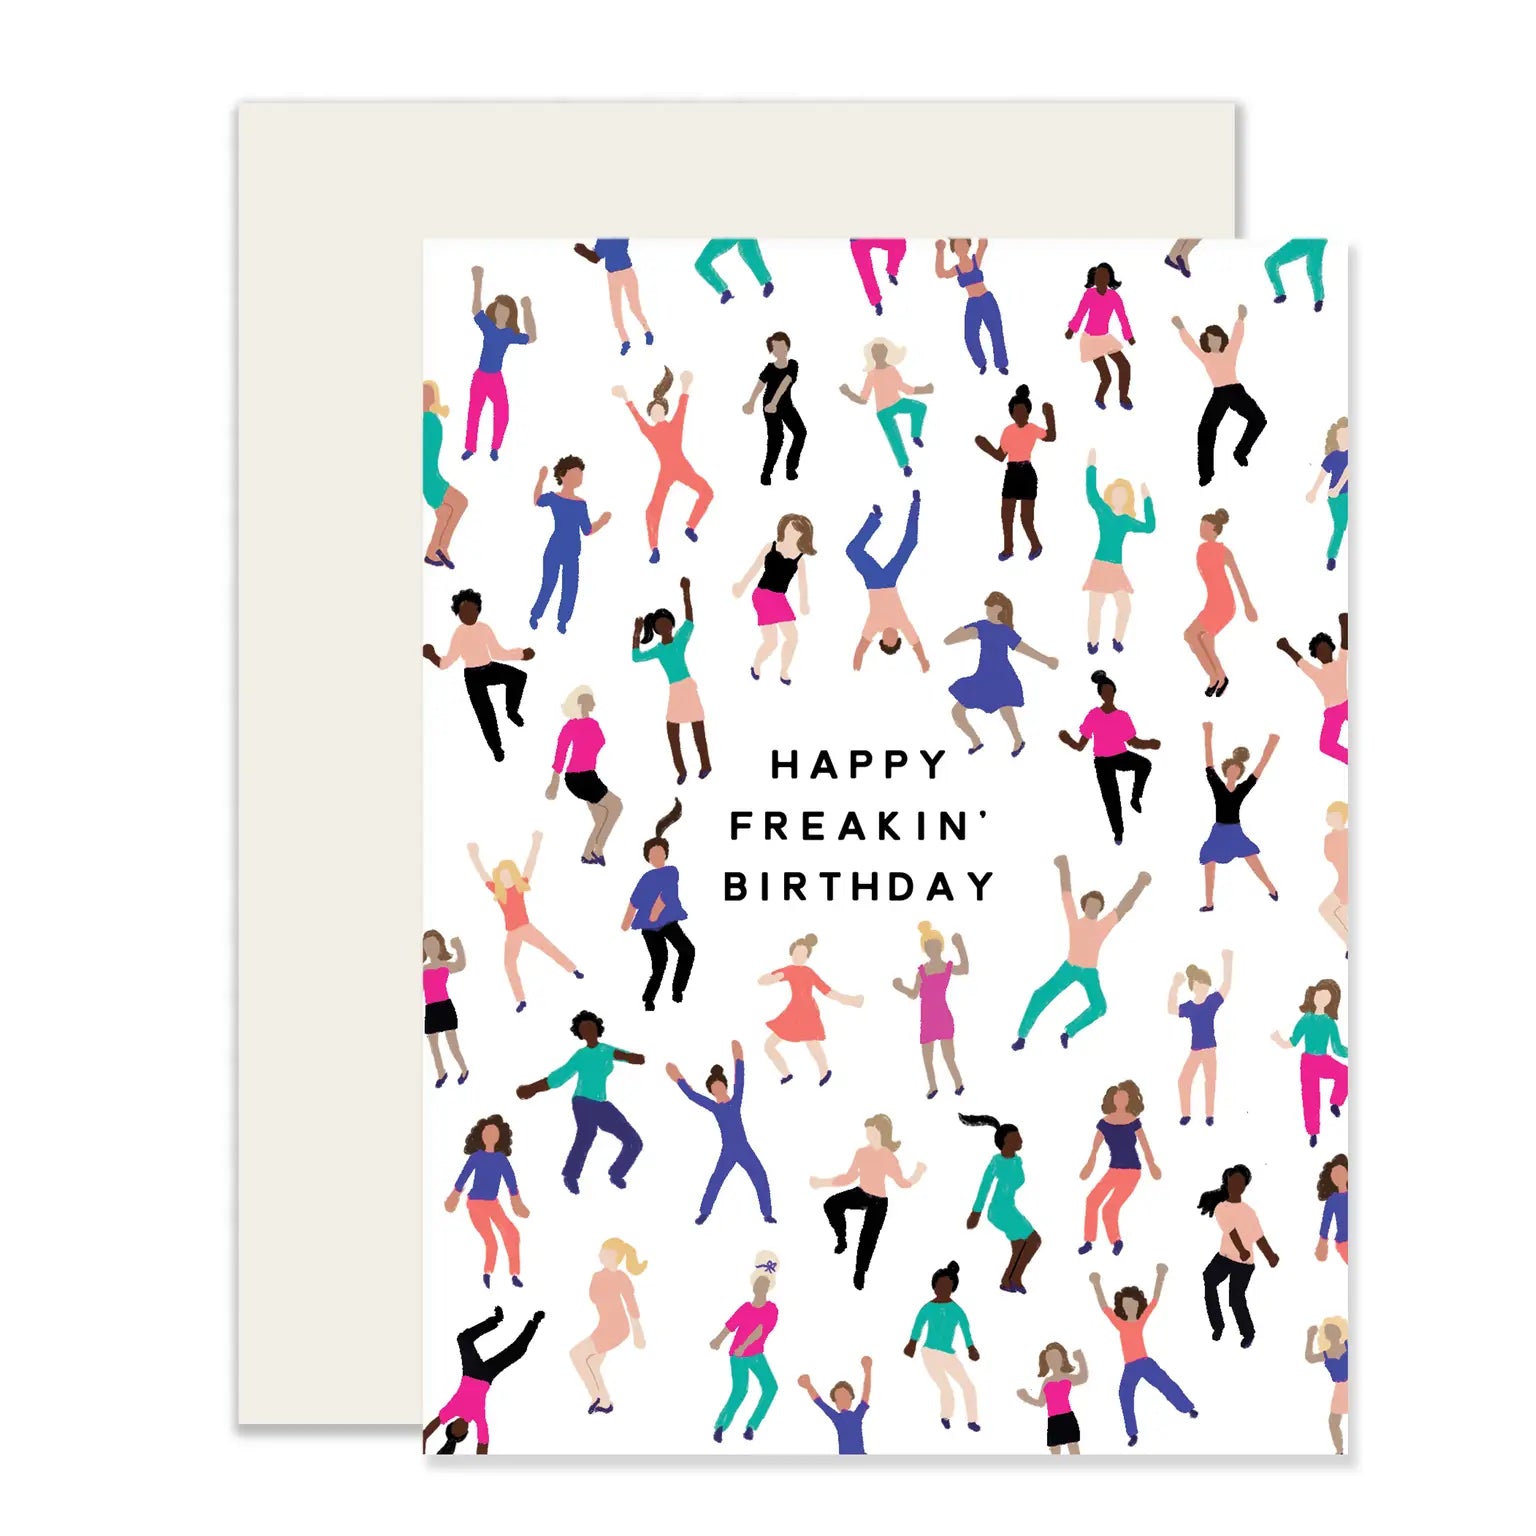 White card with black text reading "happy freakin' birthday." Illustrations of different dancers. 